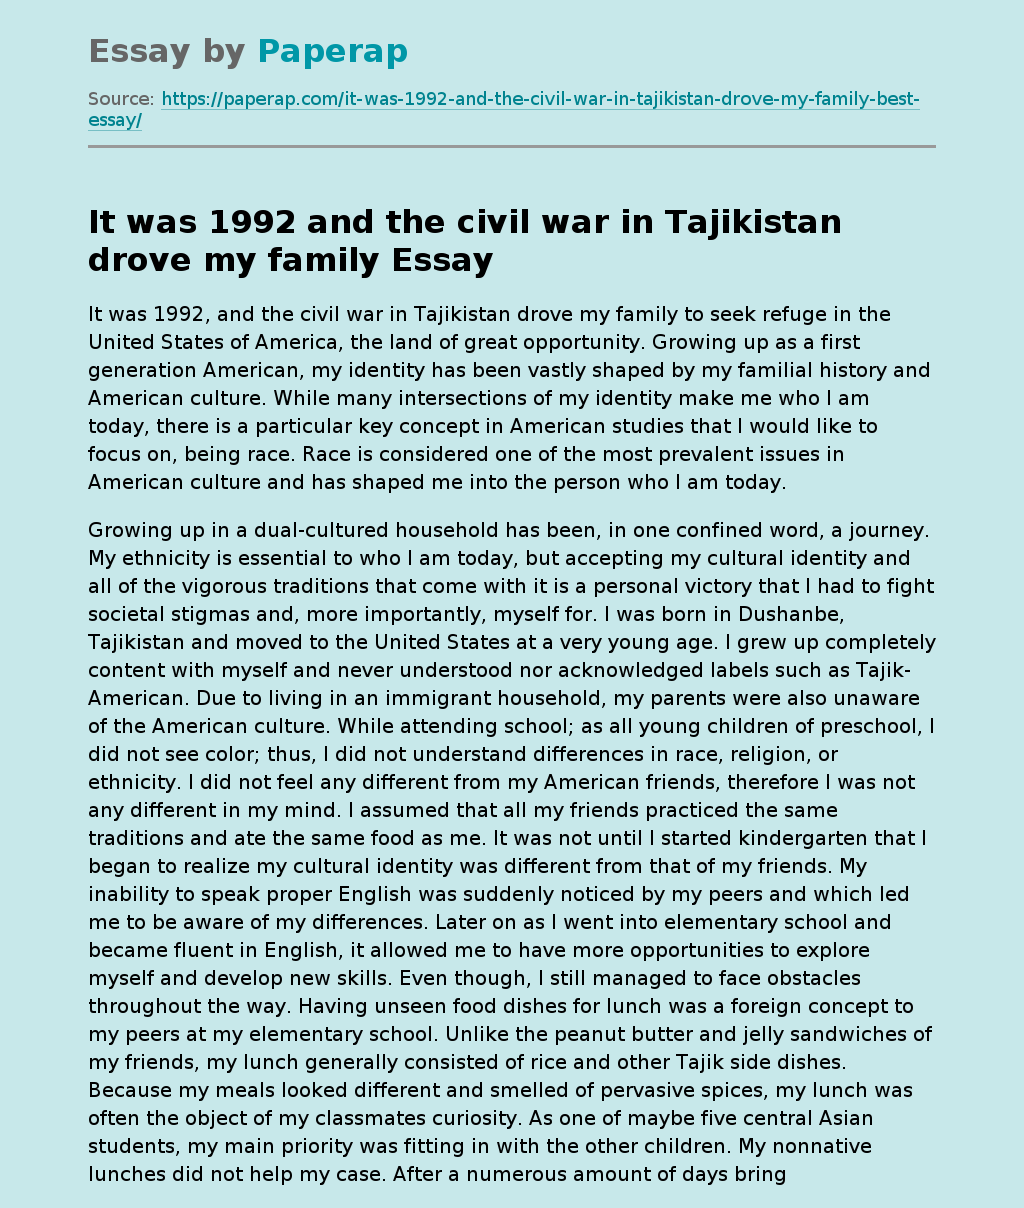 It was 1992 and the civil war in Tajikistan drove my family